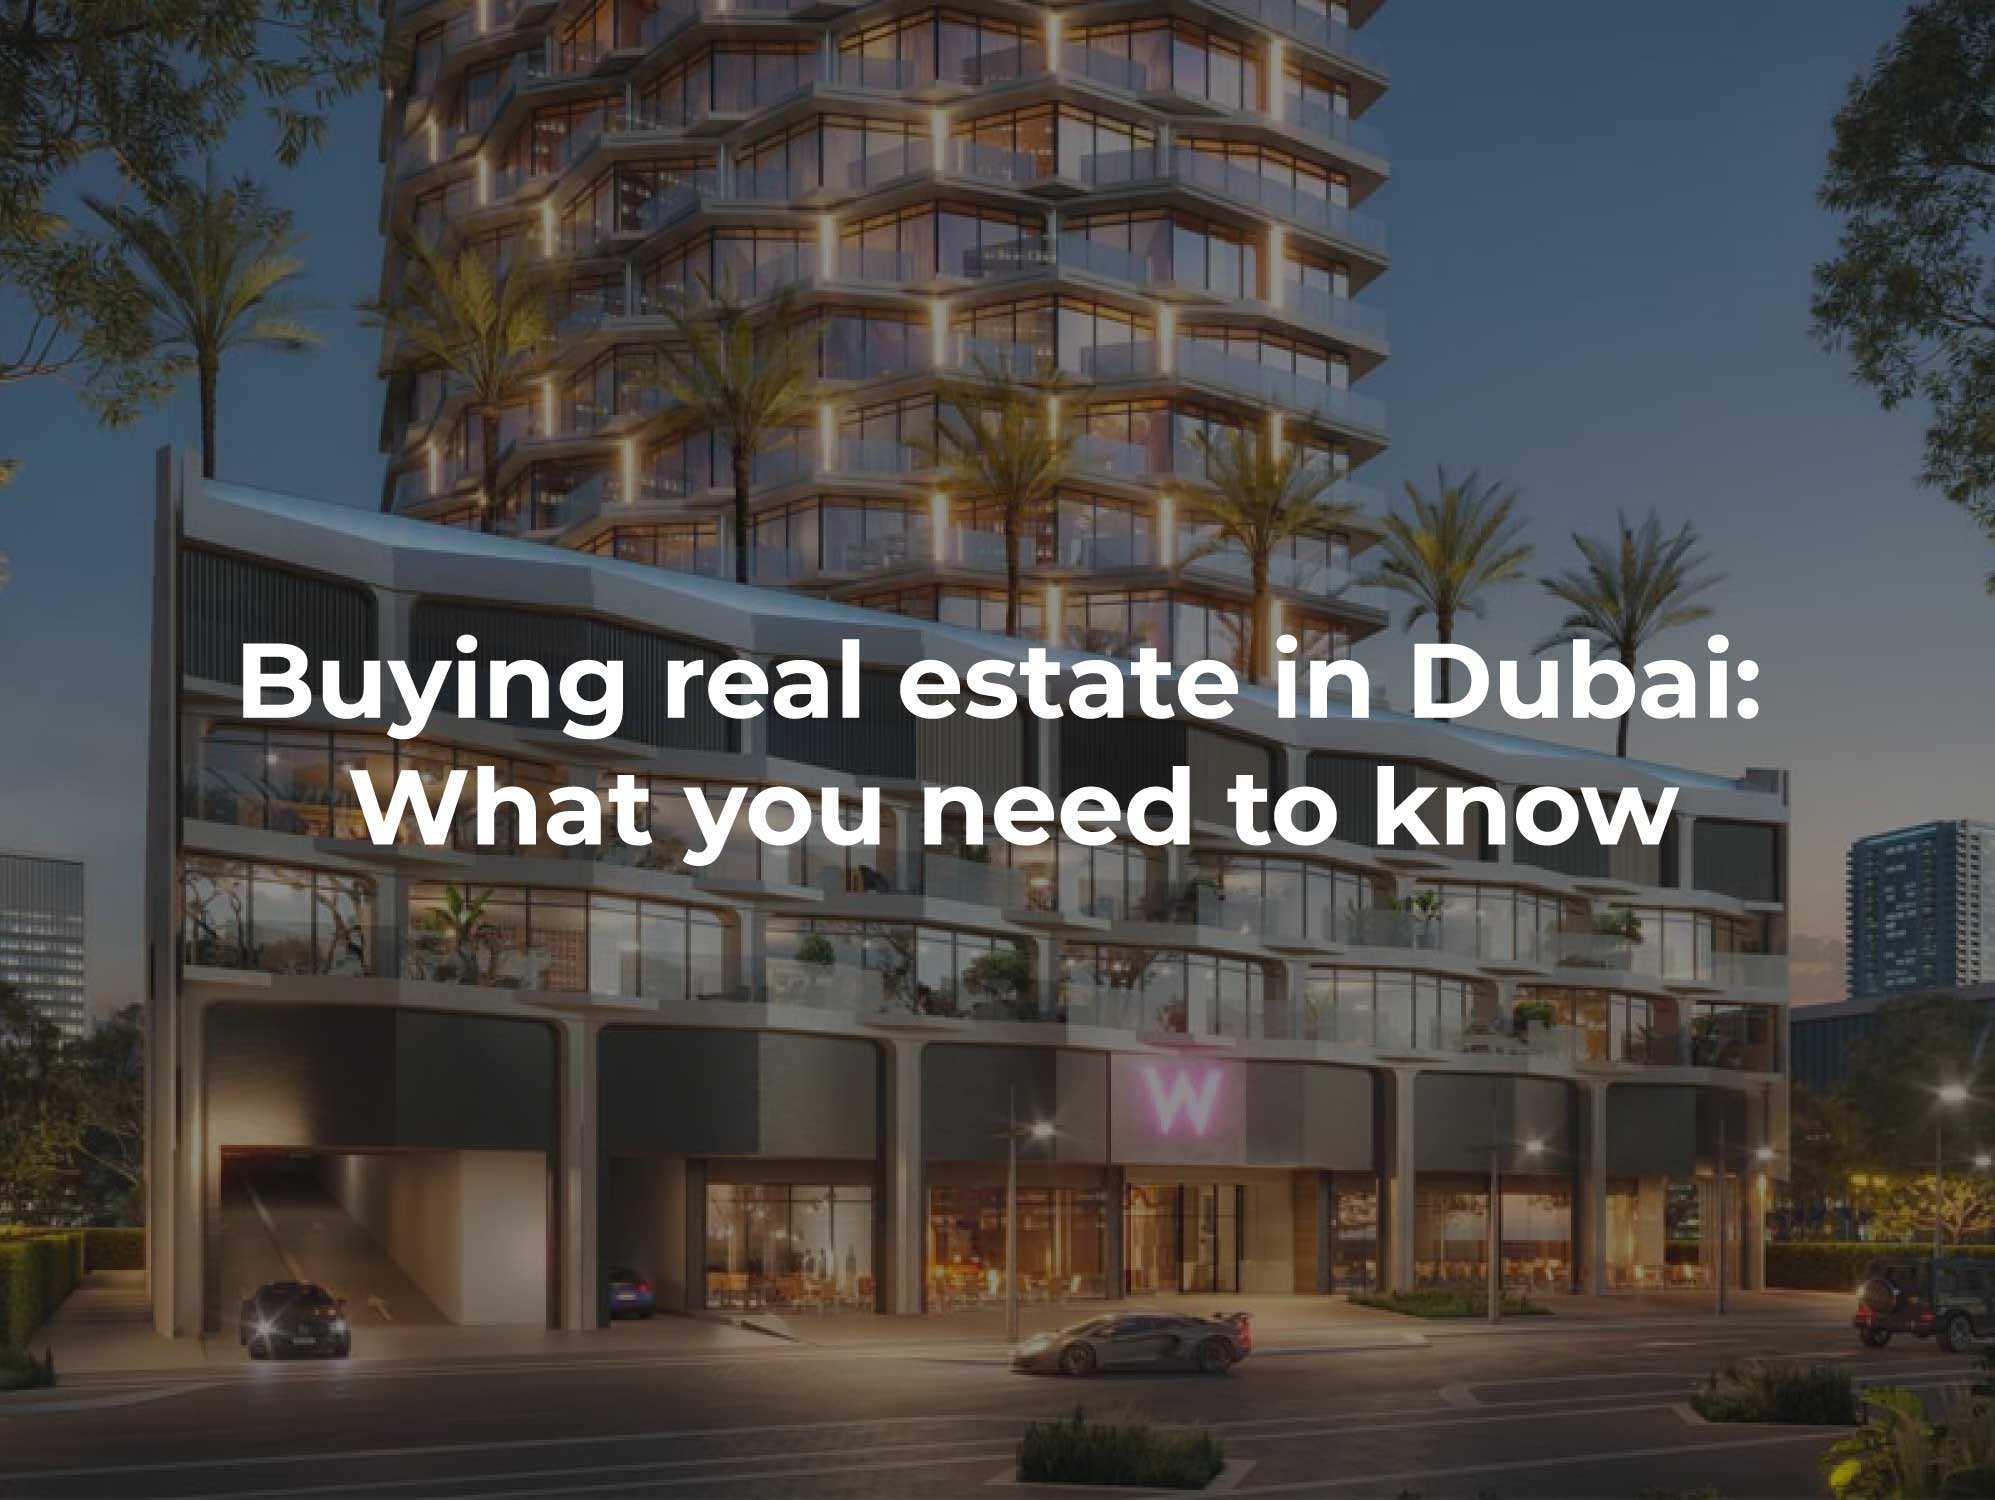 Buying real estate in Dubai: What you need to know